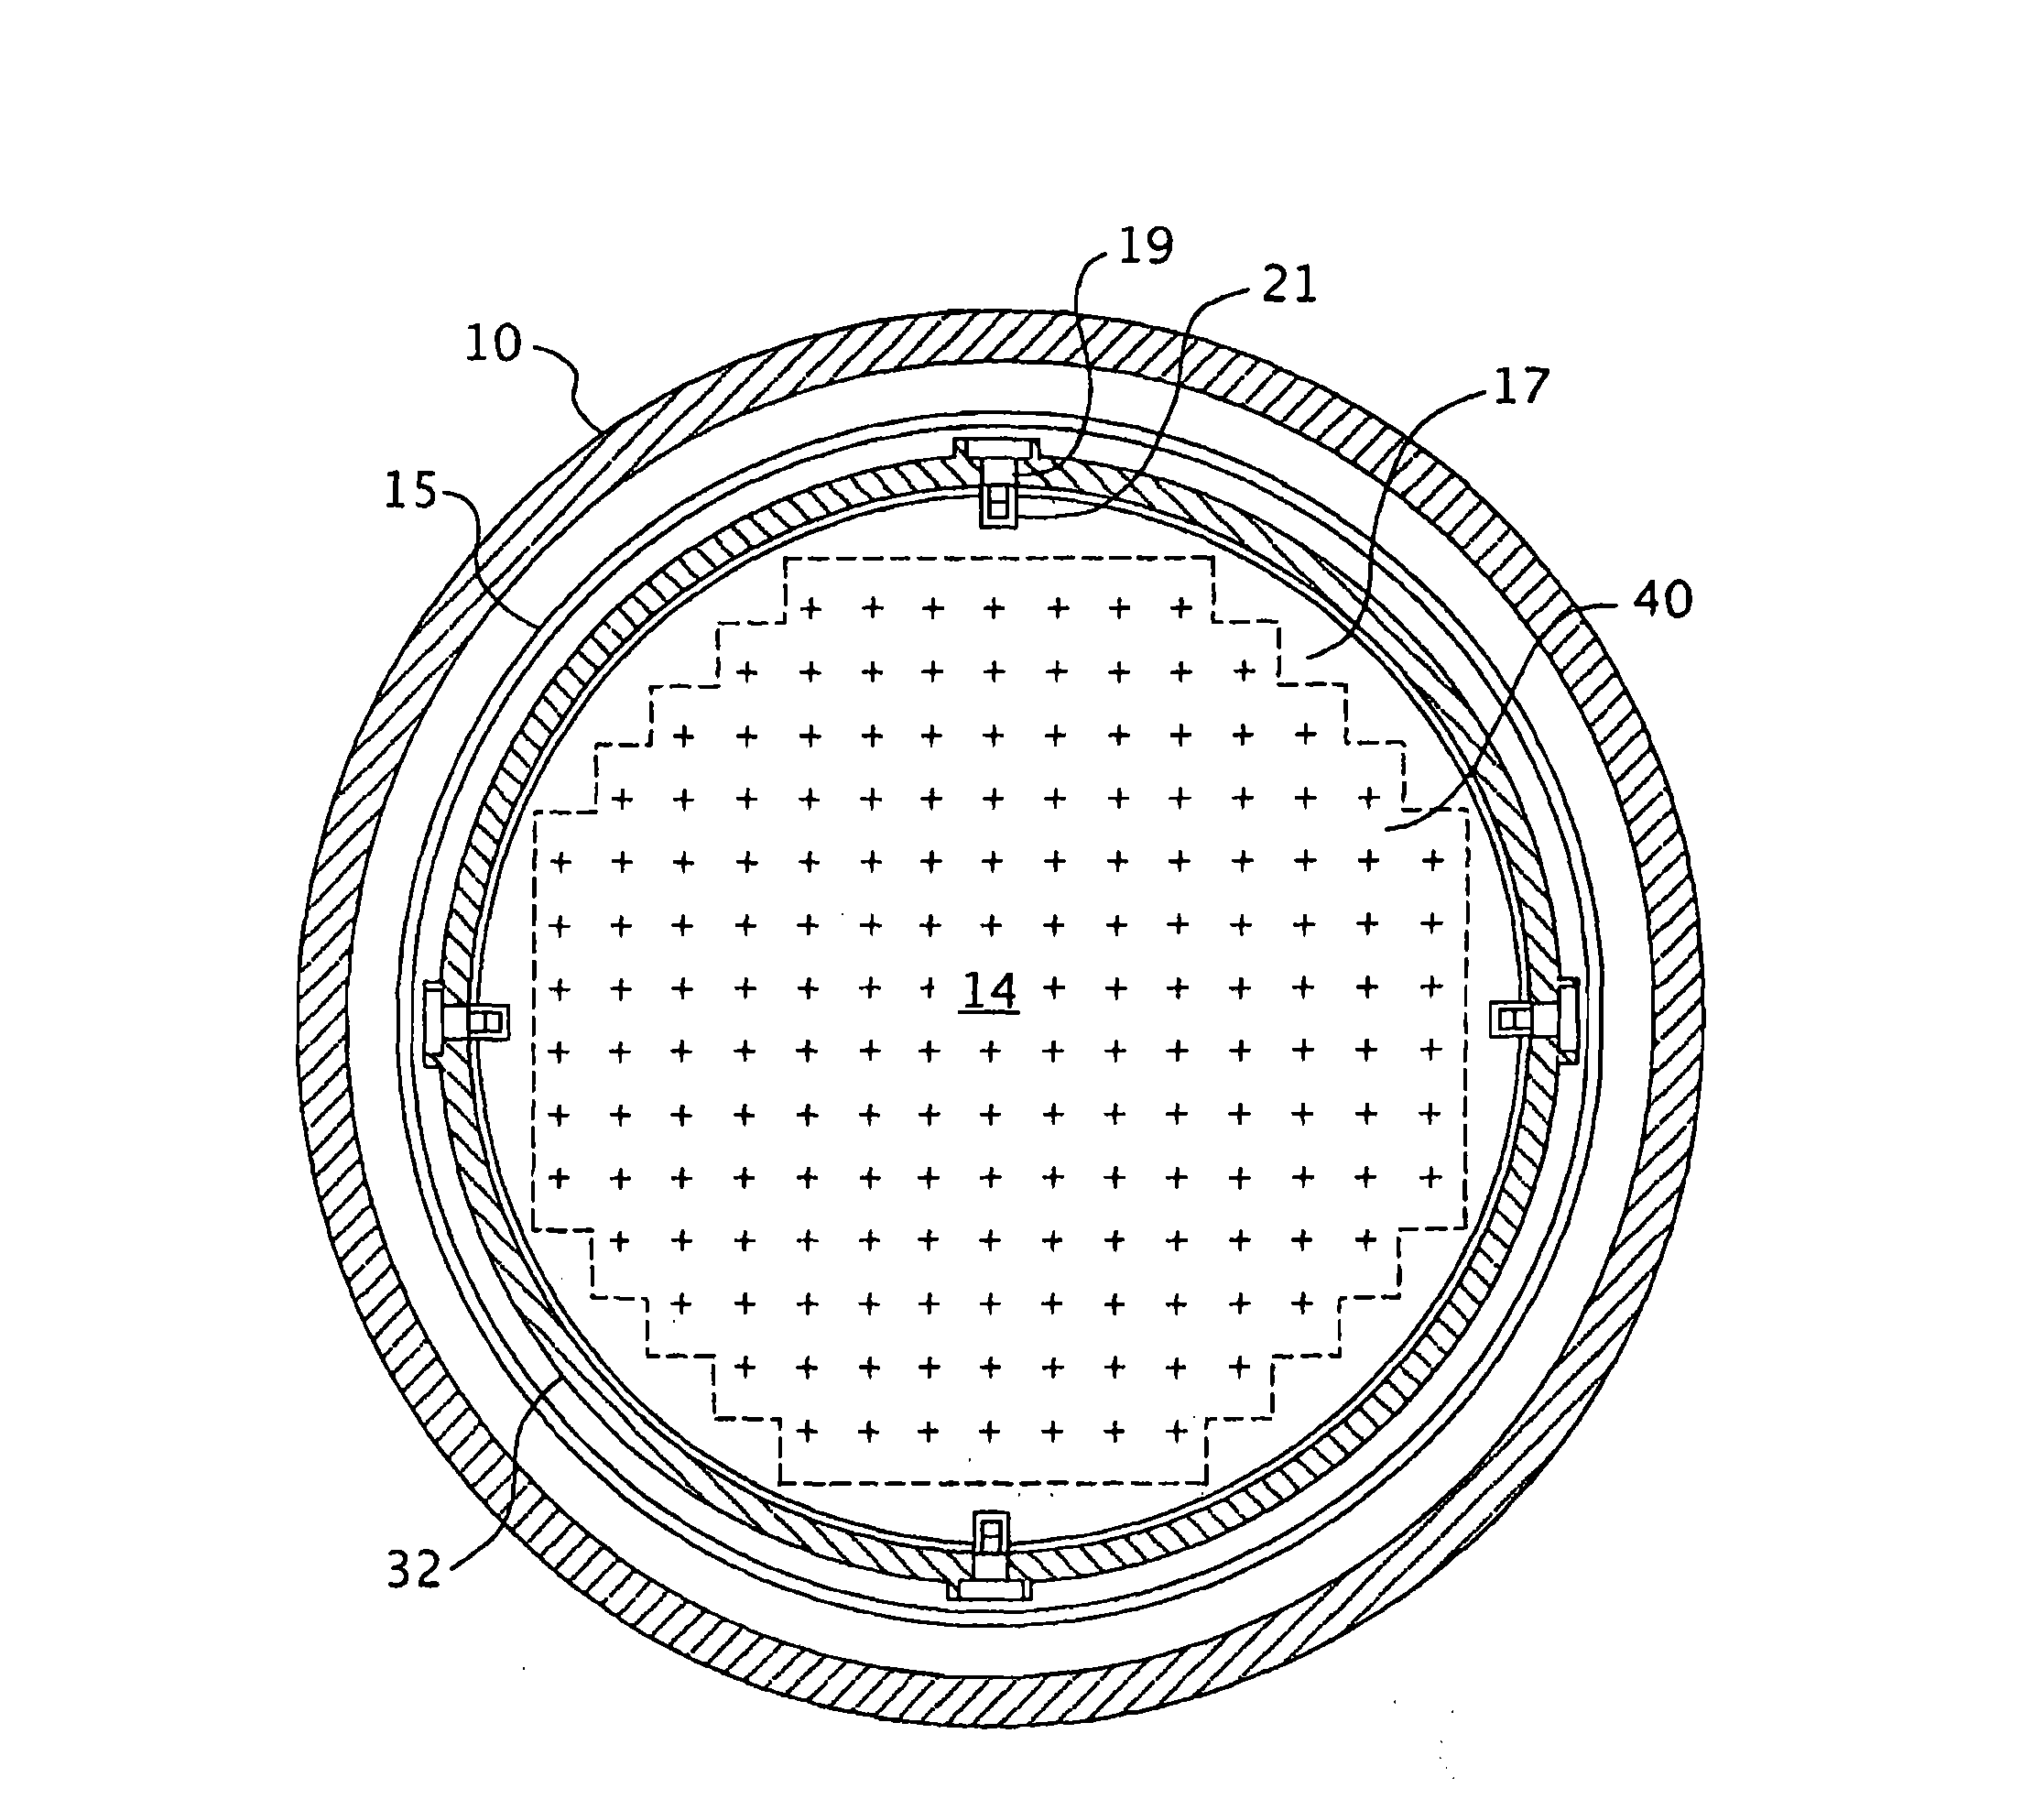 Nuclear reactor alignment plate configuration